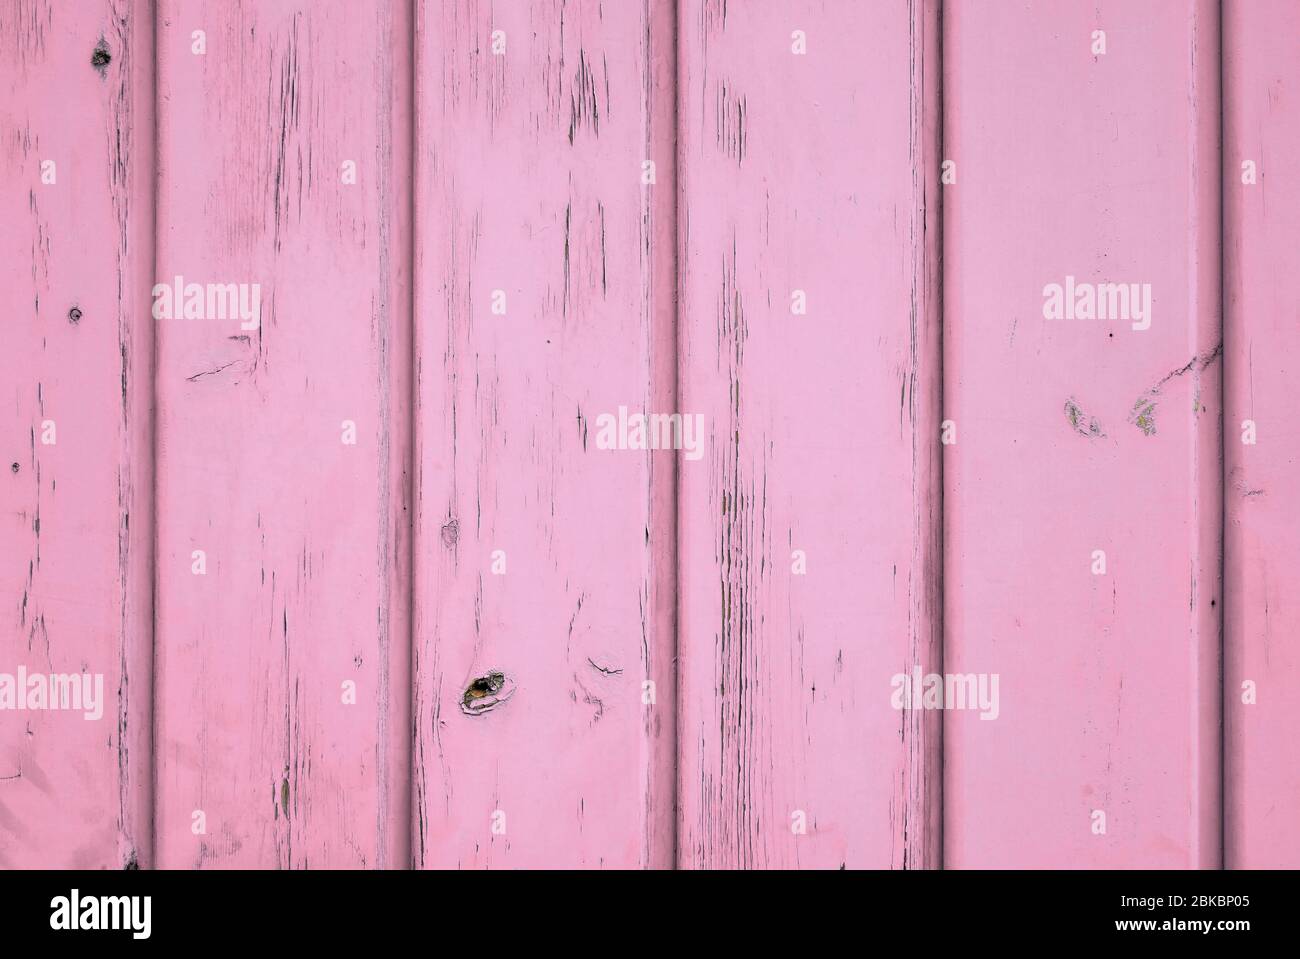 Soft pastel background of rose colour natural wood with vertical planks. Stock Photo